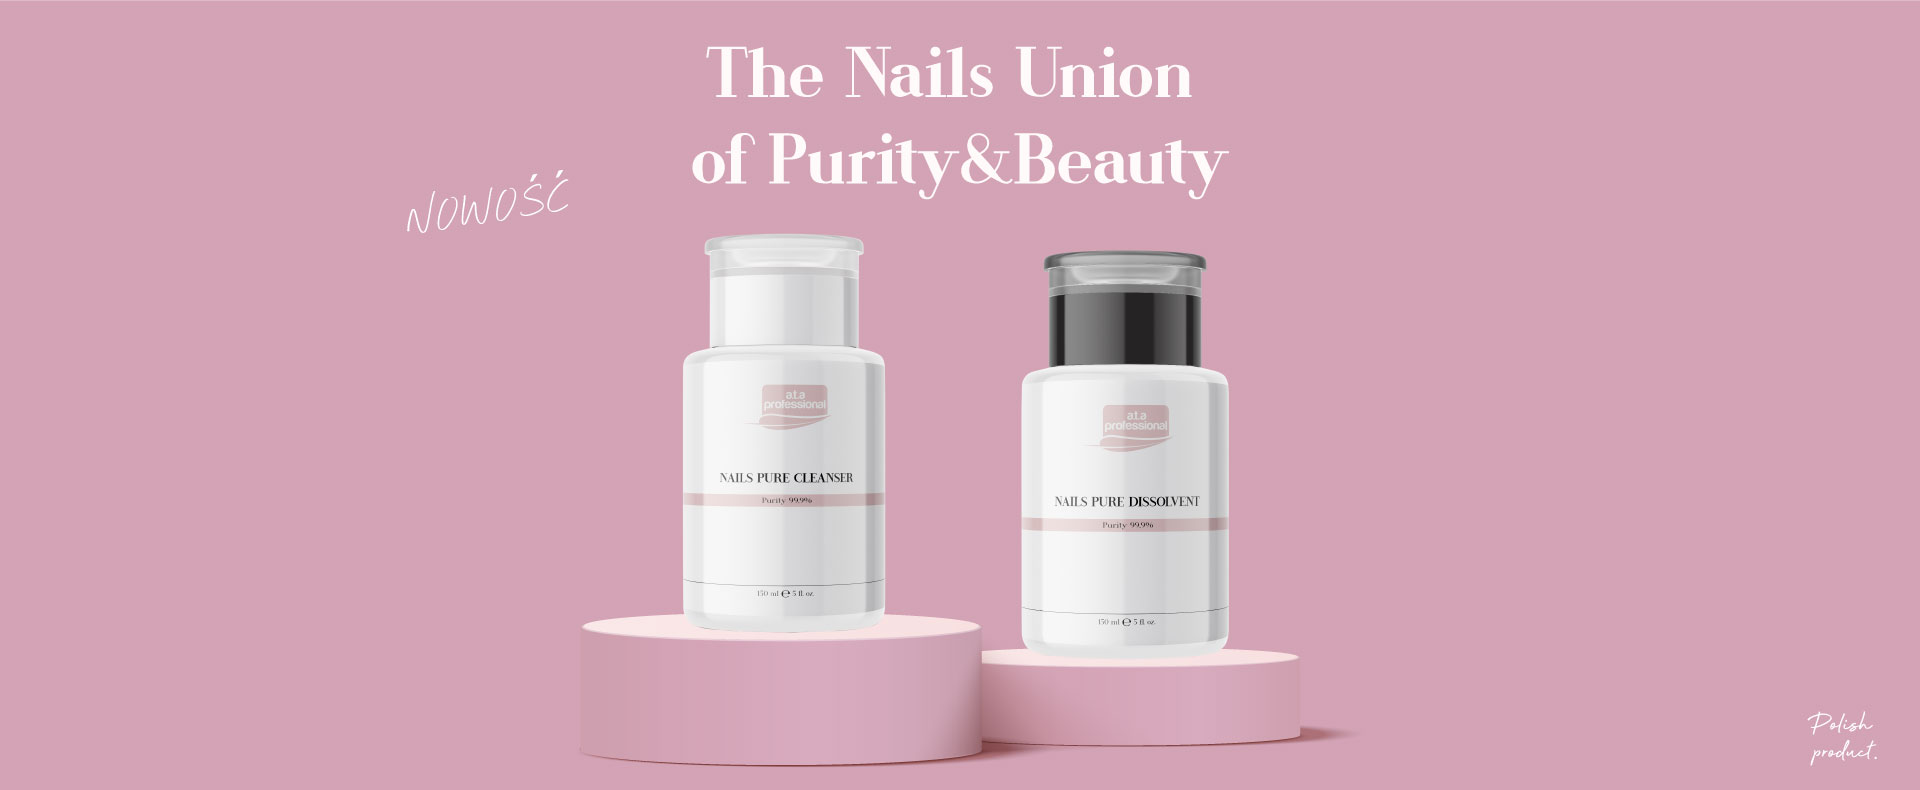 Ata Professional The Nails Union of Purity & Beauty